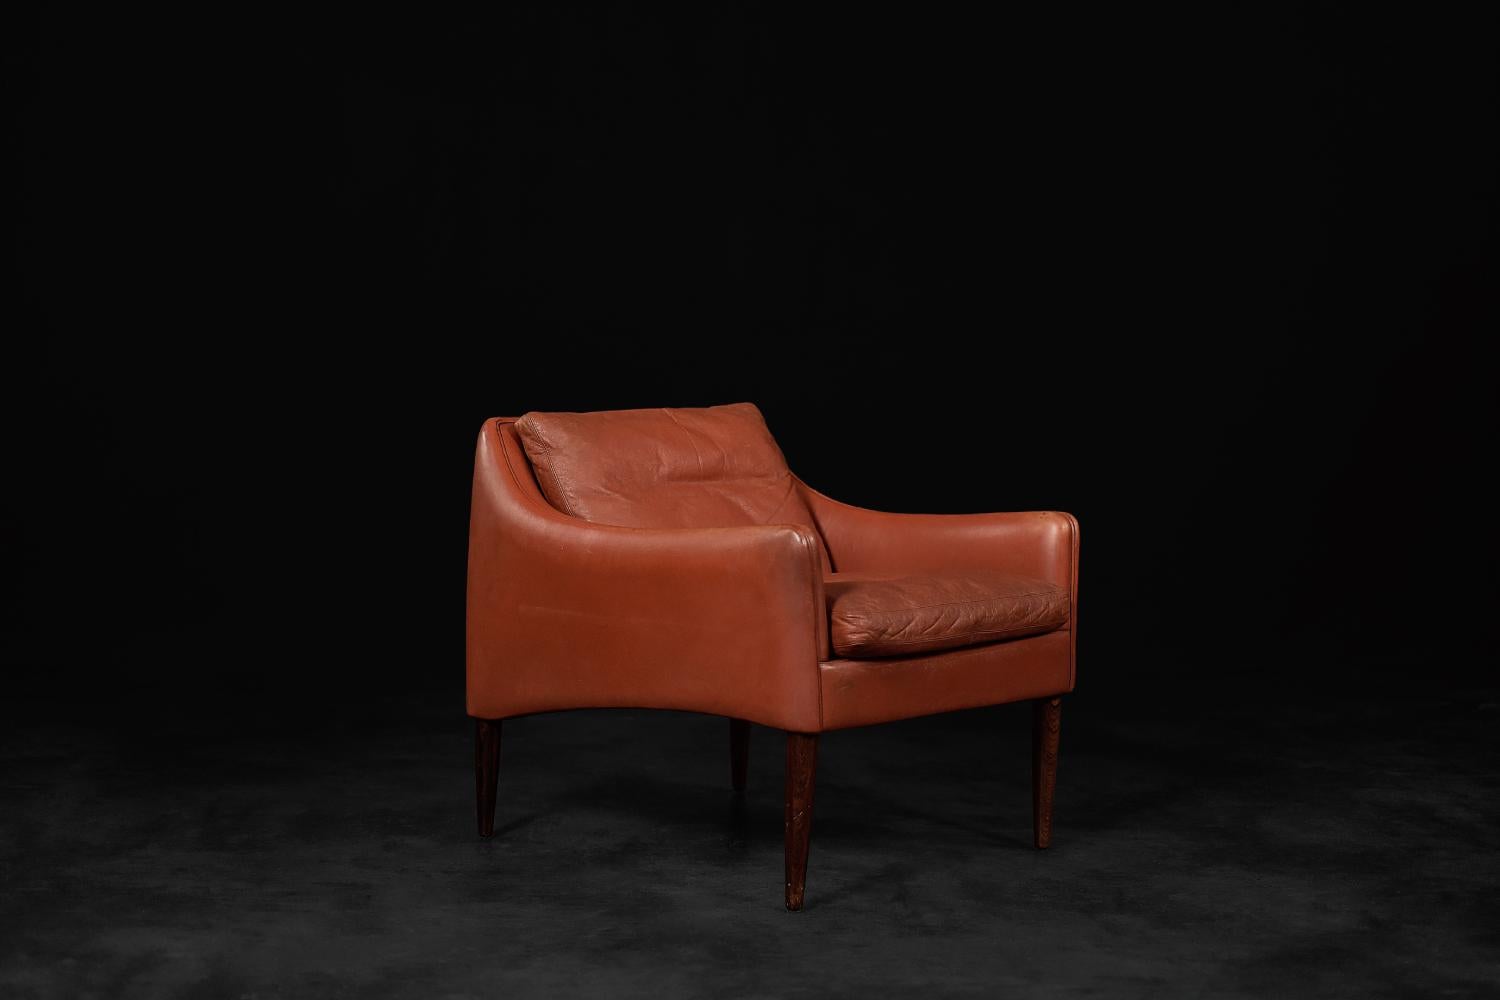 This leather armchair was designed by Hans Olsen for the Danish manufacturer CS Møbler in 1958. This is the 800 model. The armchair is low, with a slim and organic form. It is characterized by extraordinary lightness compared to other classics of